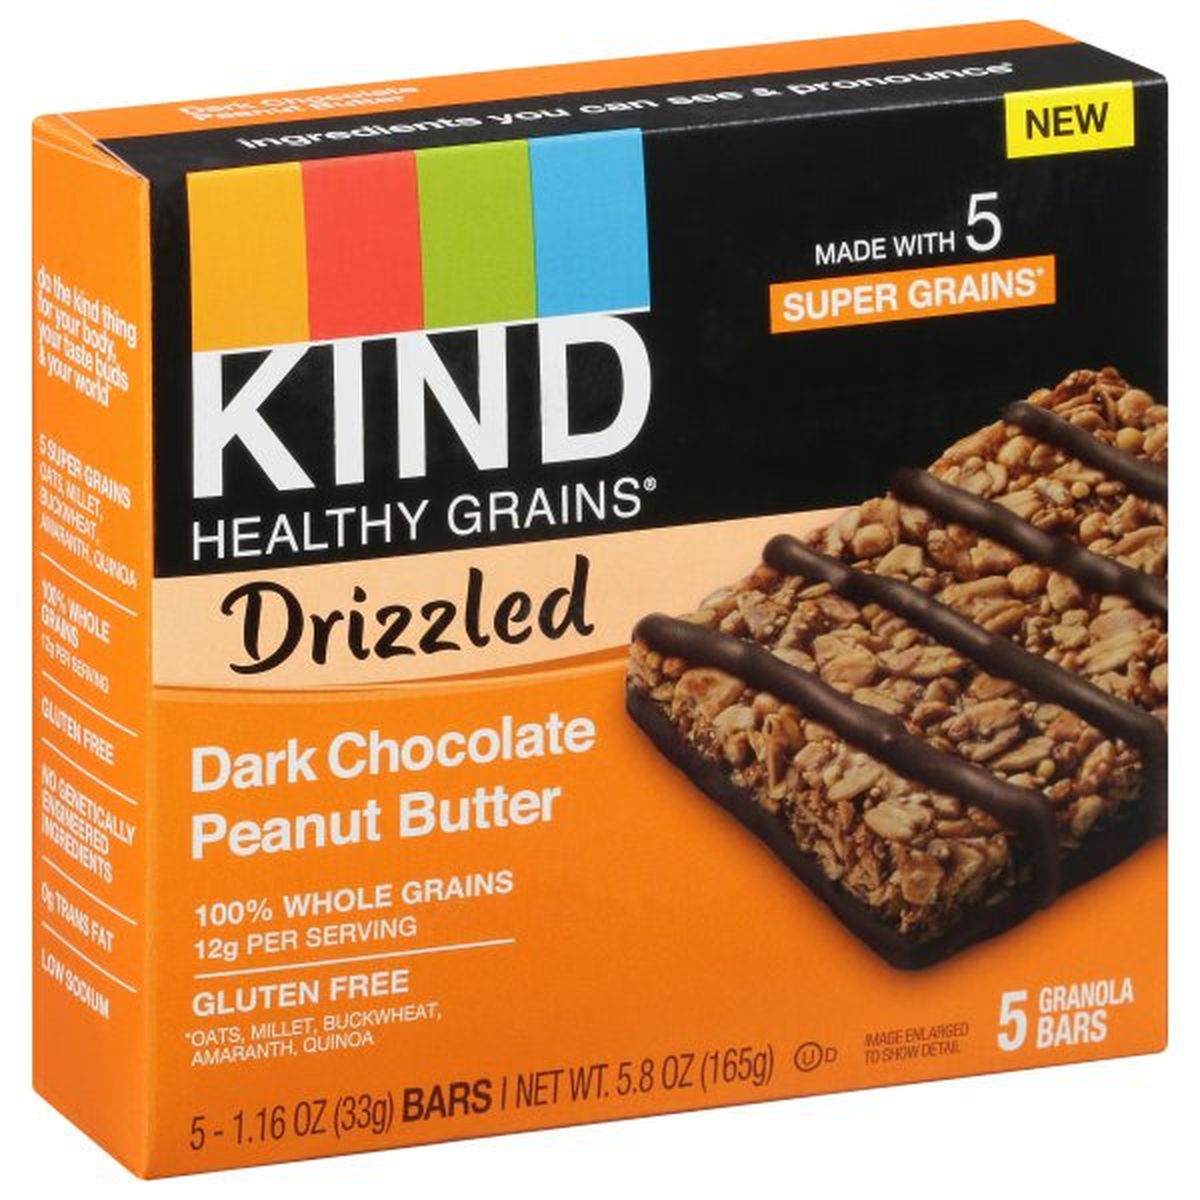 Calories in KIND Healthy Grains Granola Bars, Gluten Free, Dark Chocolate Peanut Butter, Drizzled, 5 Pack